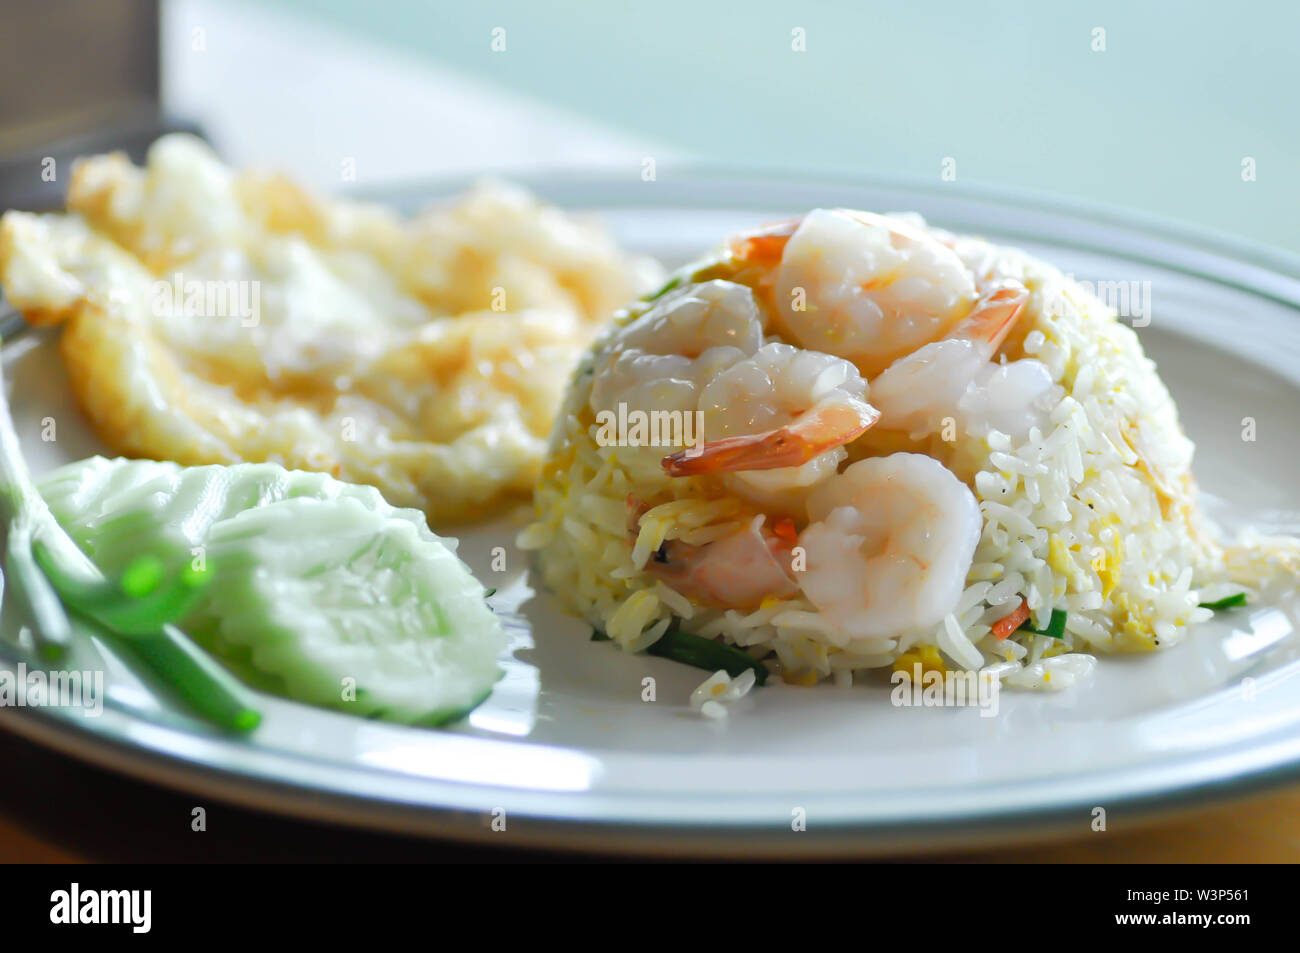 stir-fried rice with shrimp and fried egg and vegetable Stock Photo